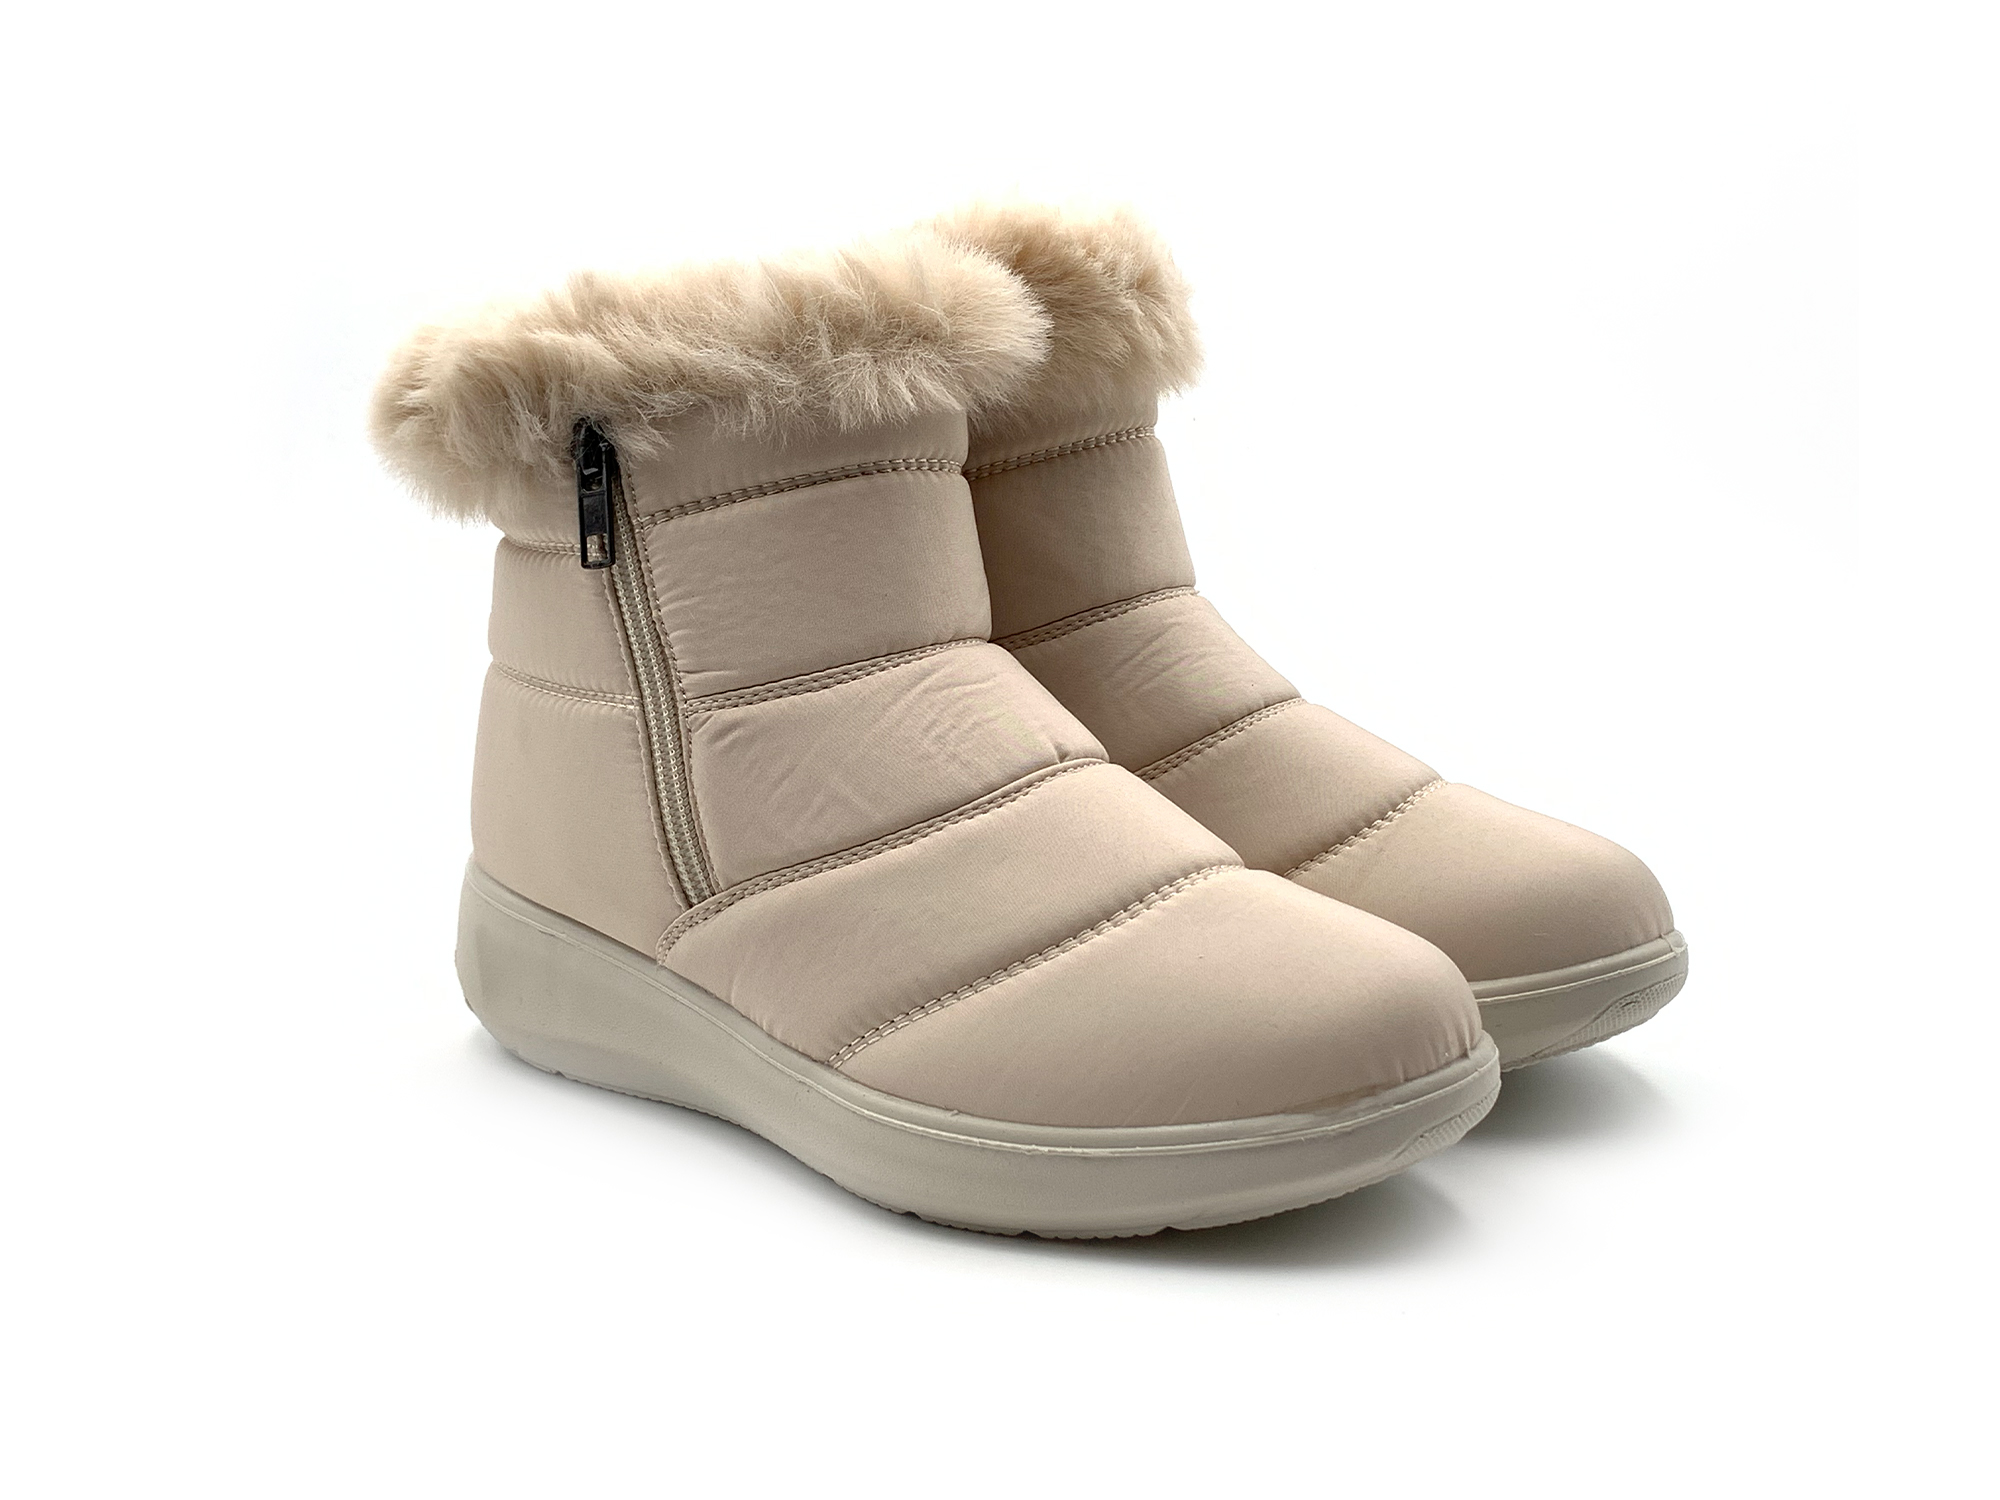 mysoft Womens Snow Boots Warm Faux Fur Lined Mid-Calf Winter Boots 